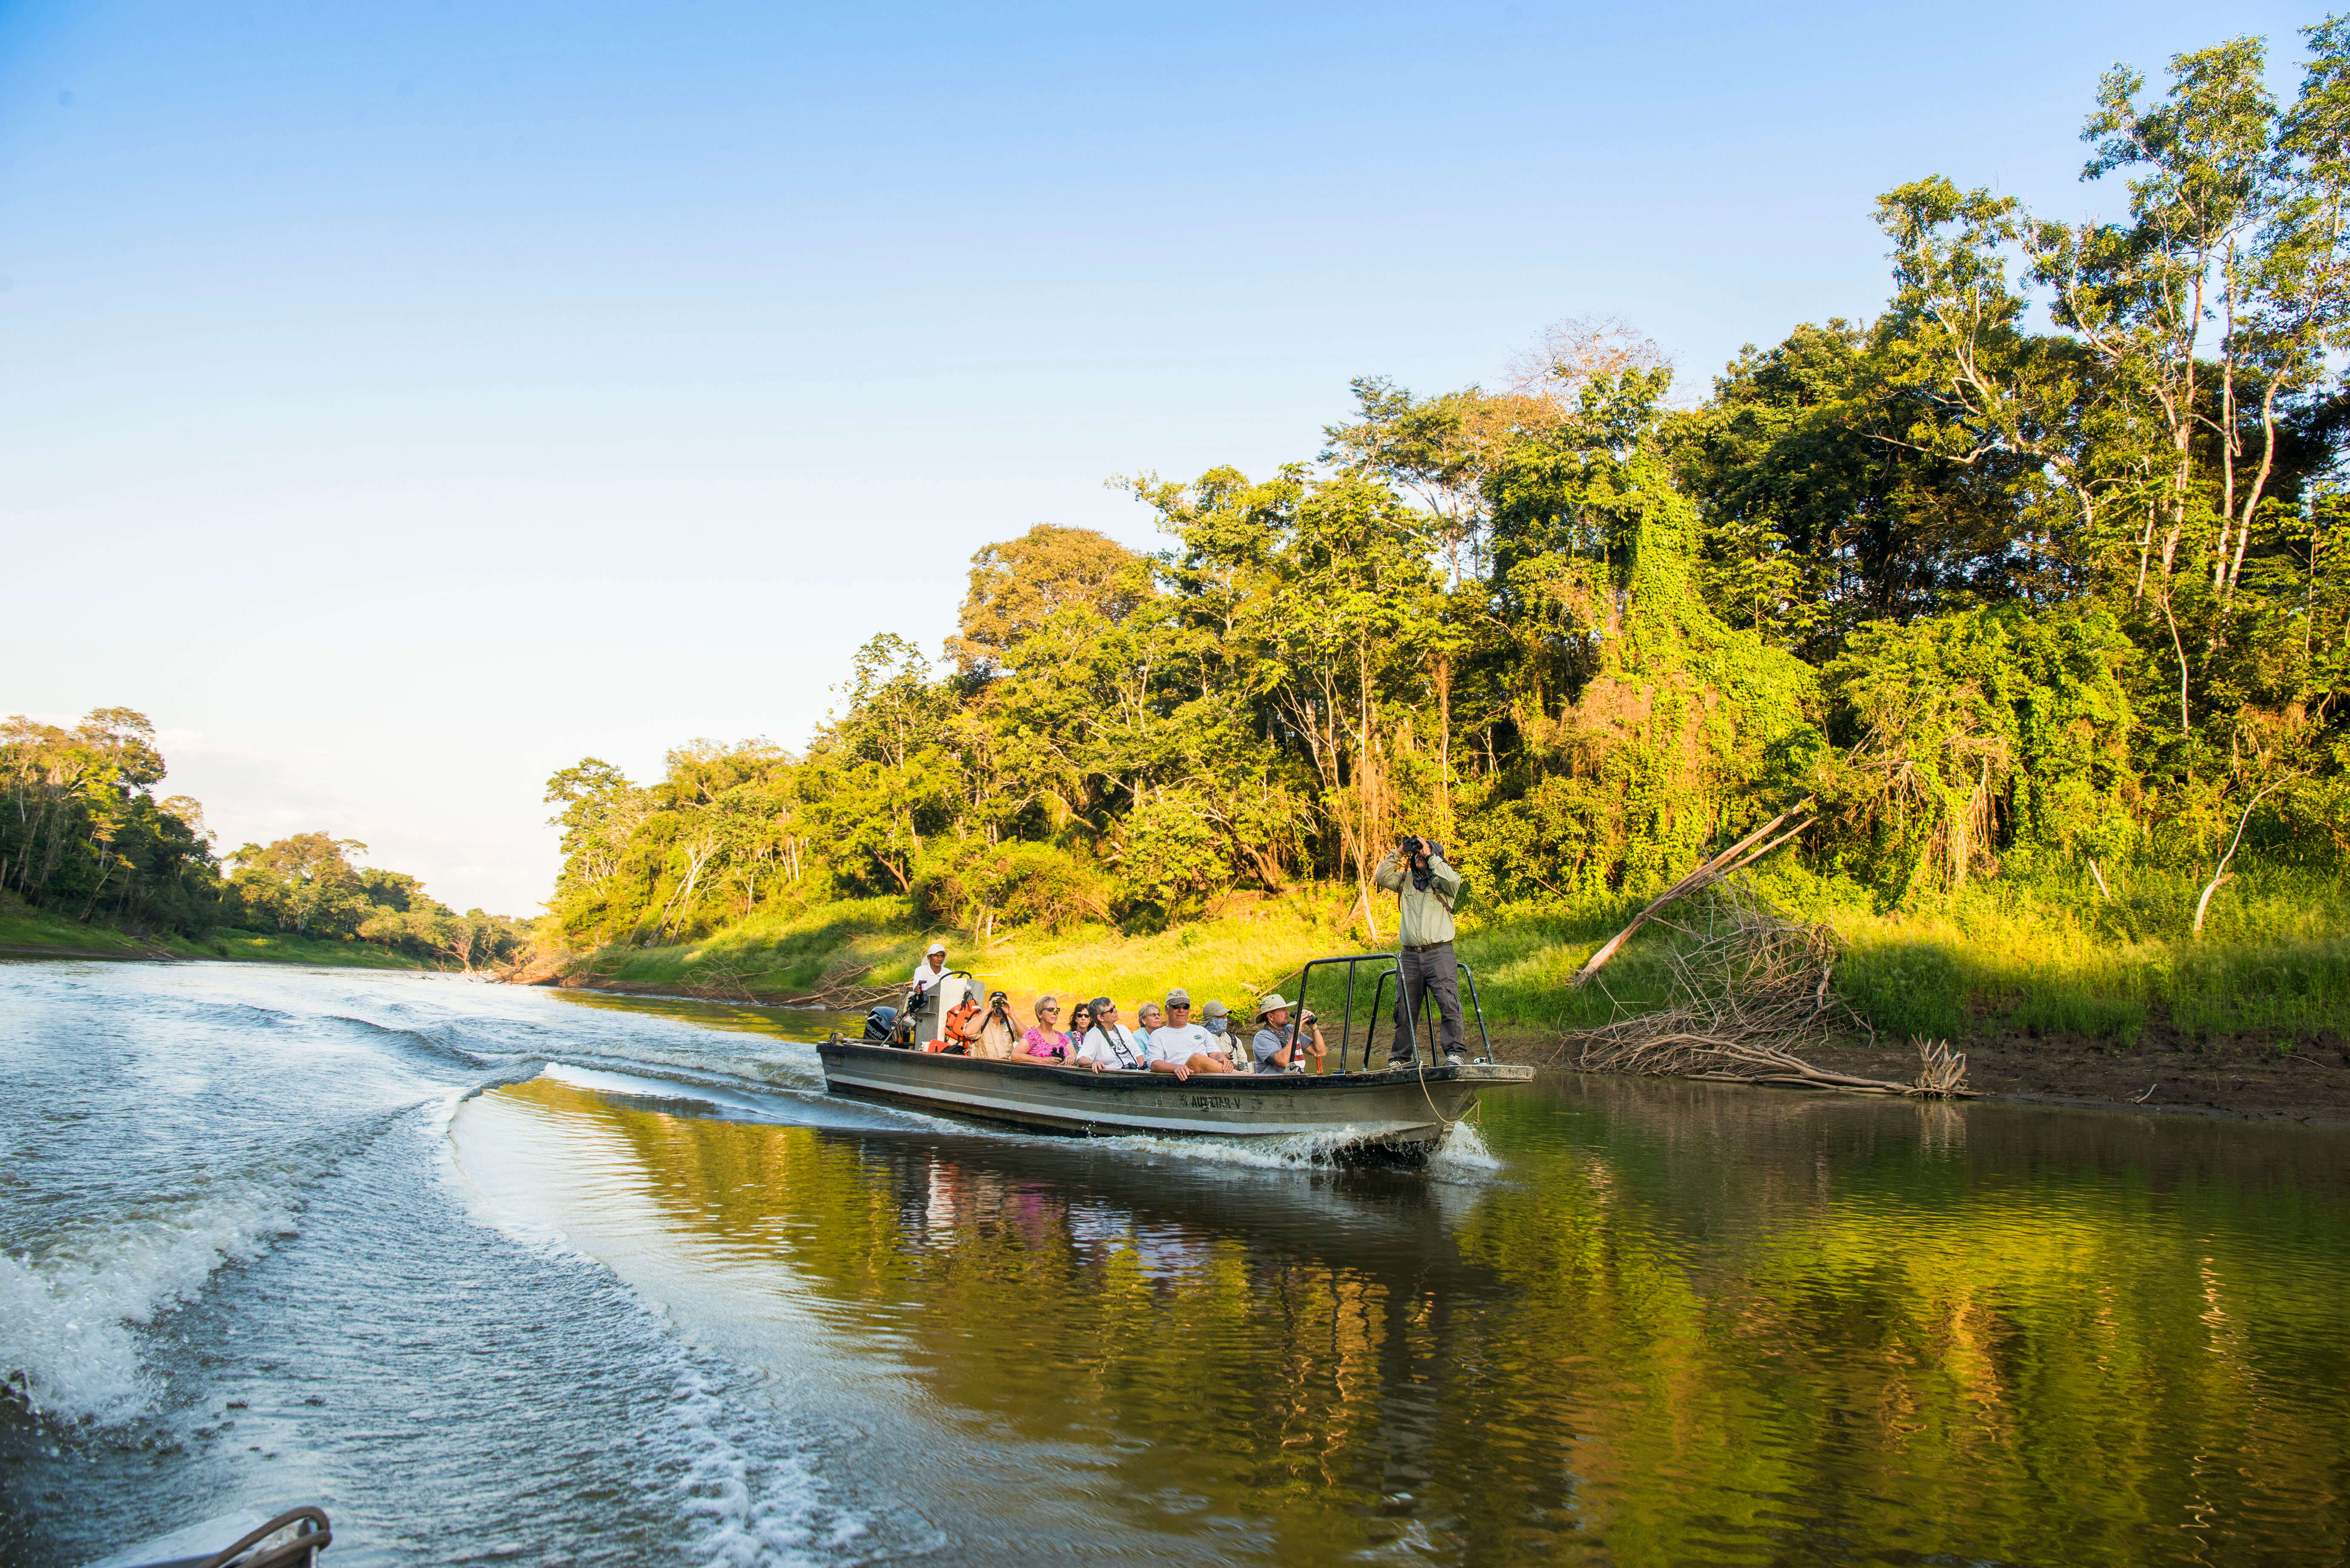 Passengers of the Delfin II on a skiff xploring the waters of the Amazon